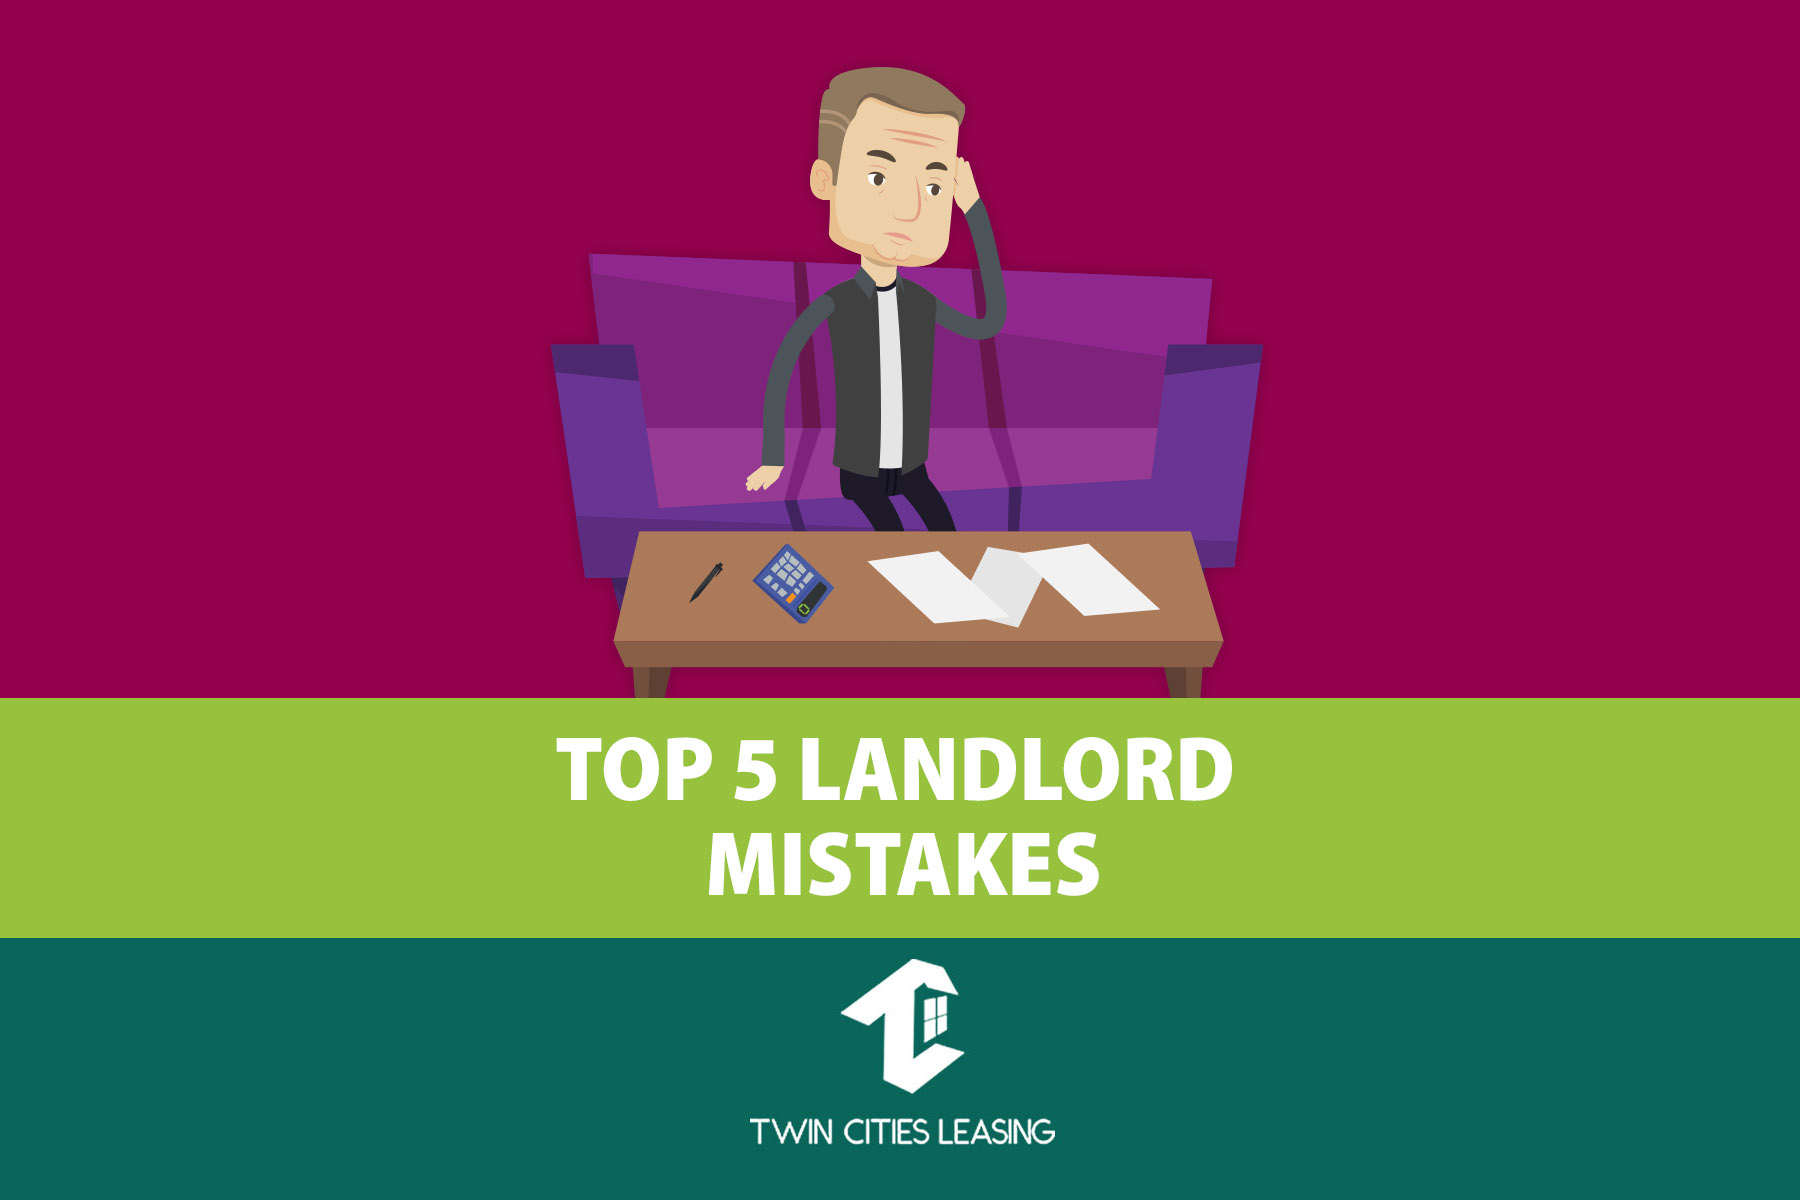 Top 5 Landlord Mistakes